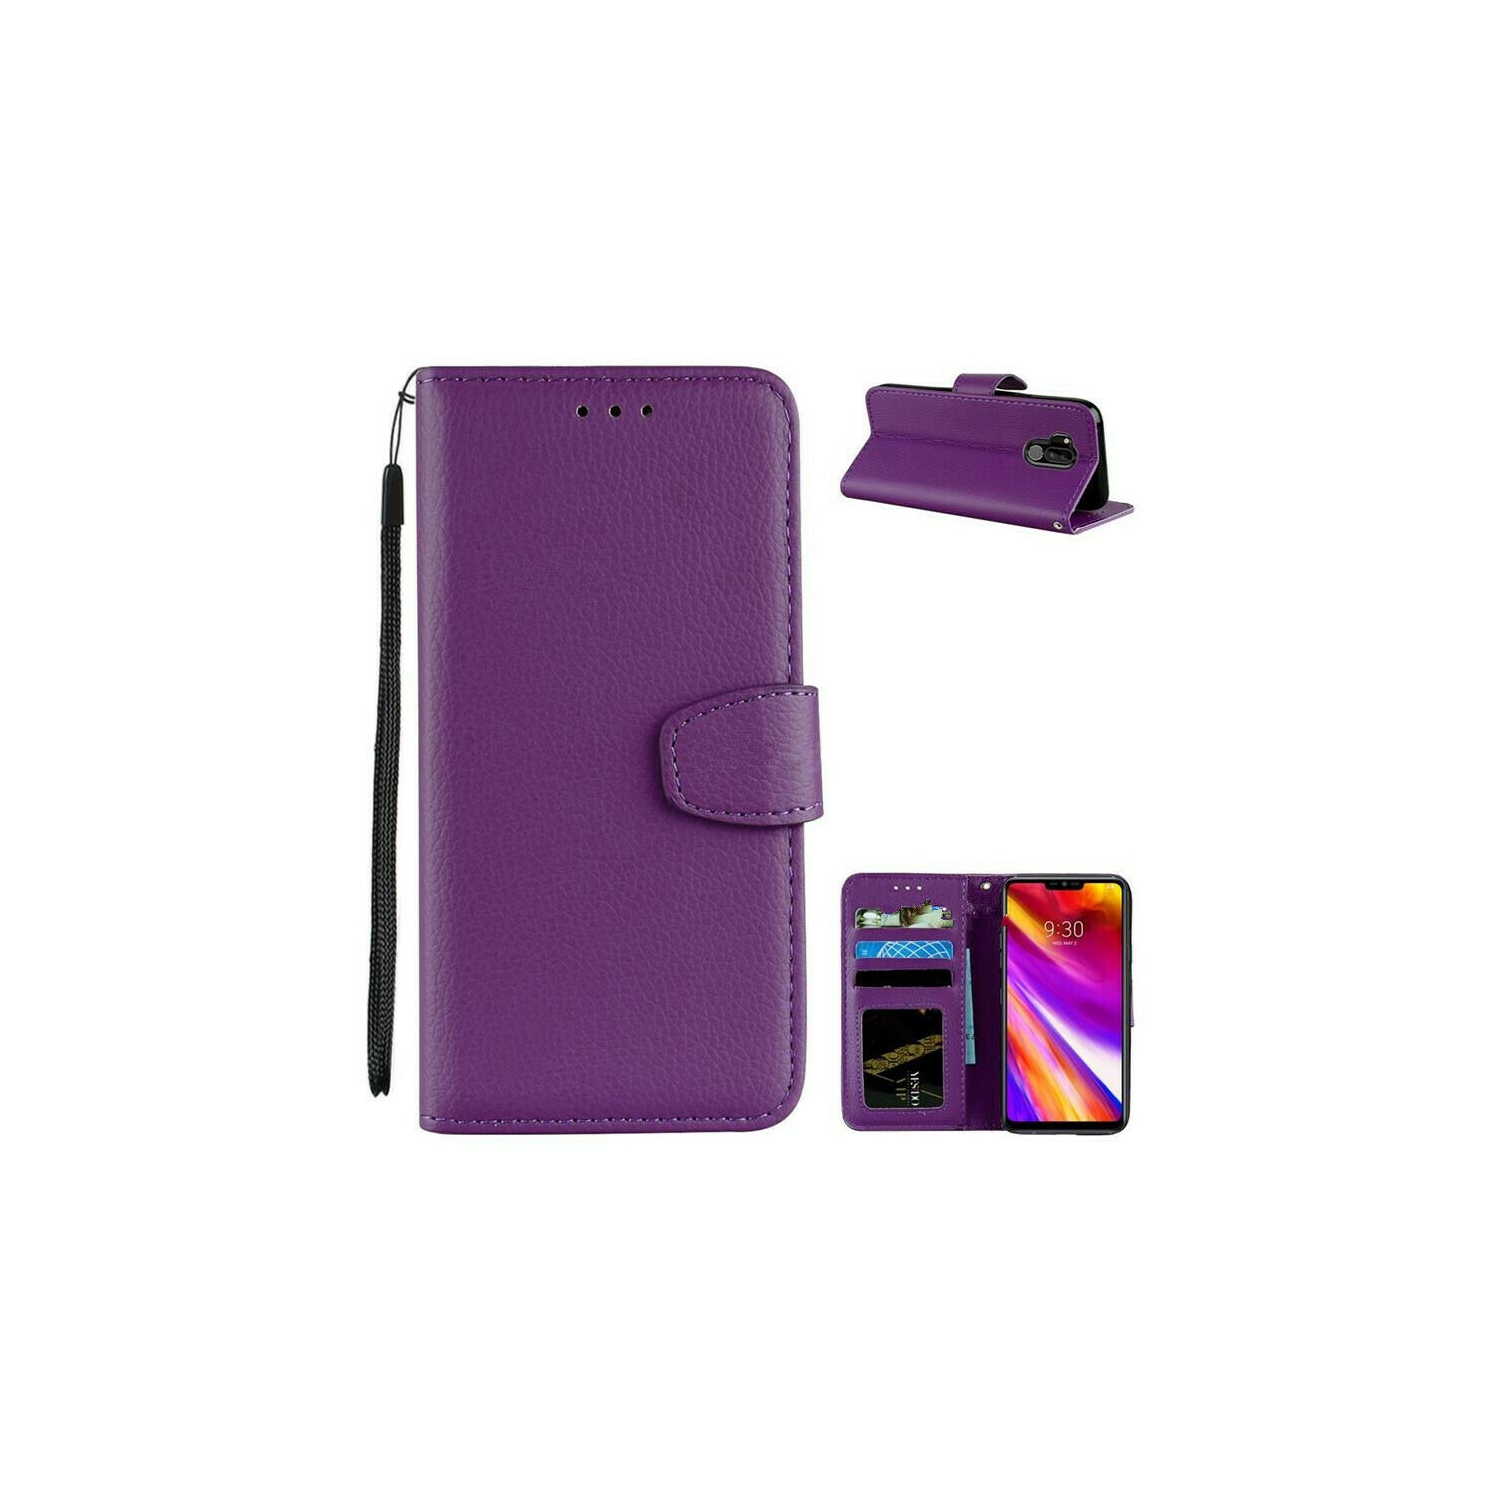 [CS] LG G7 ThinQ / G7 One Case, Magnetic Leather Folio Wallet Flip Case Cover with Card Slot, Purple